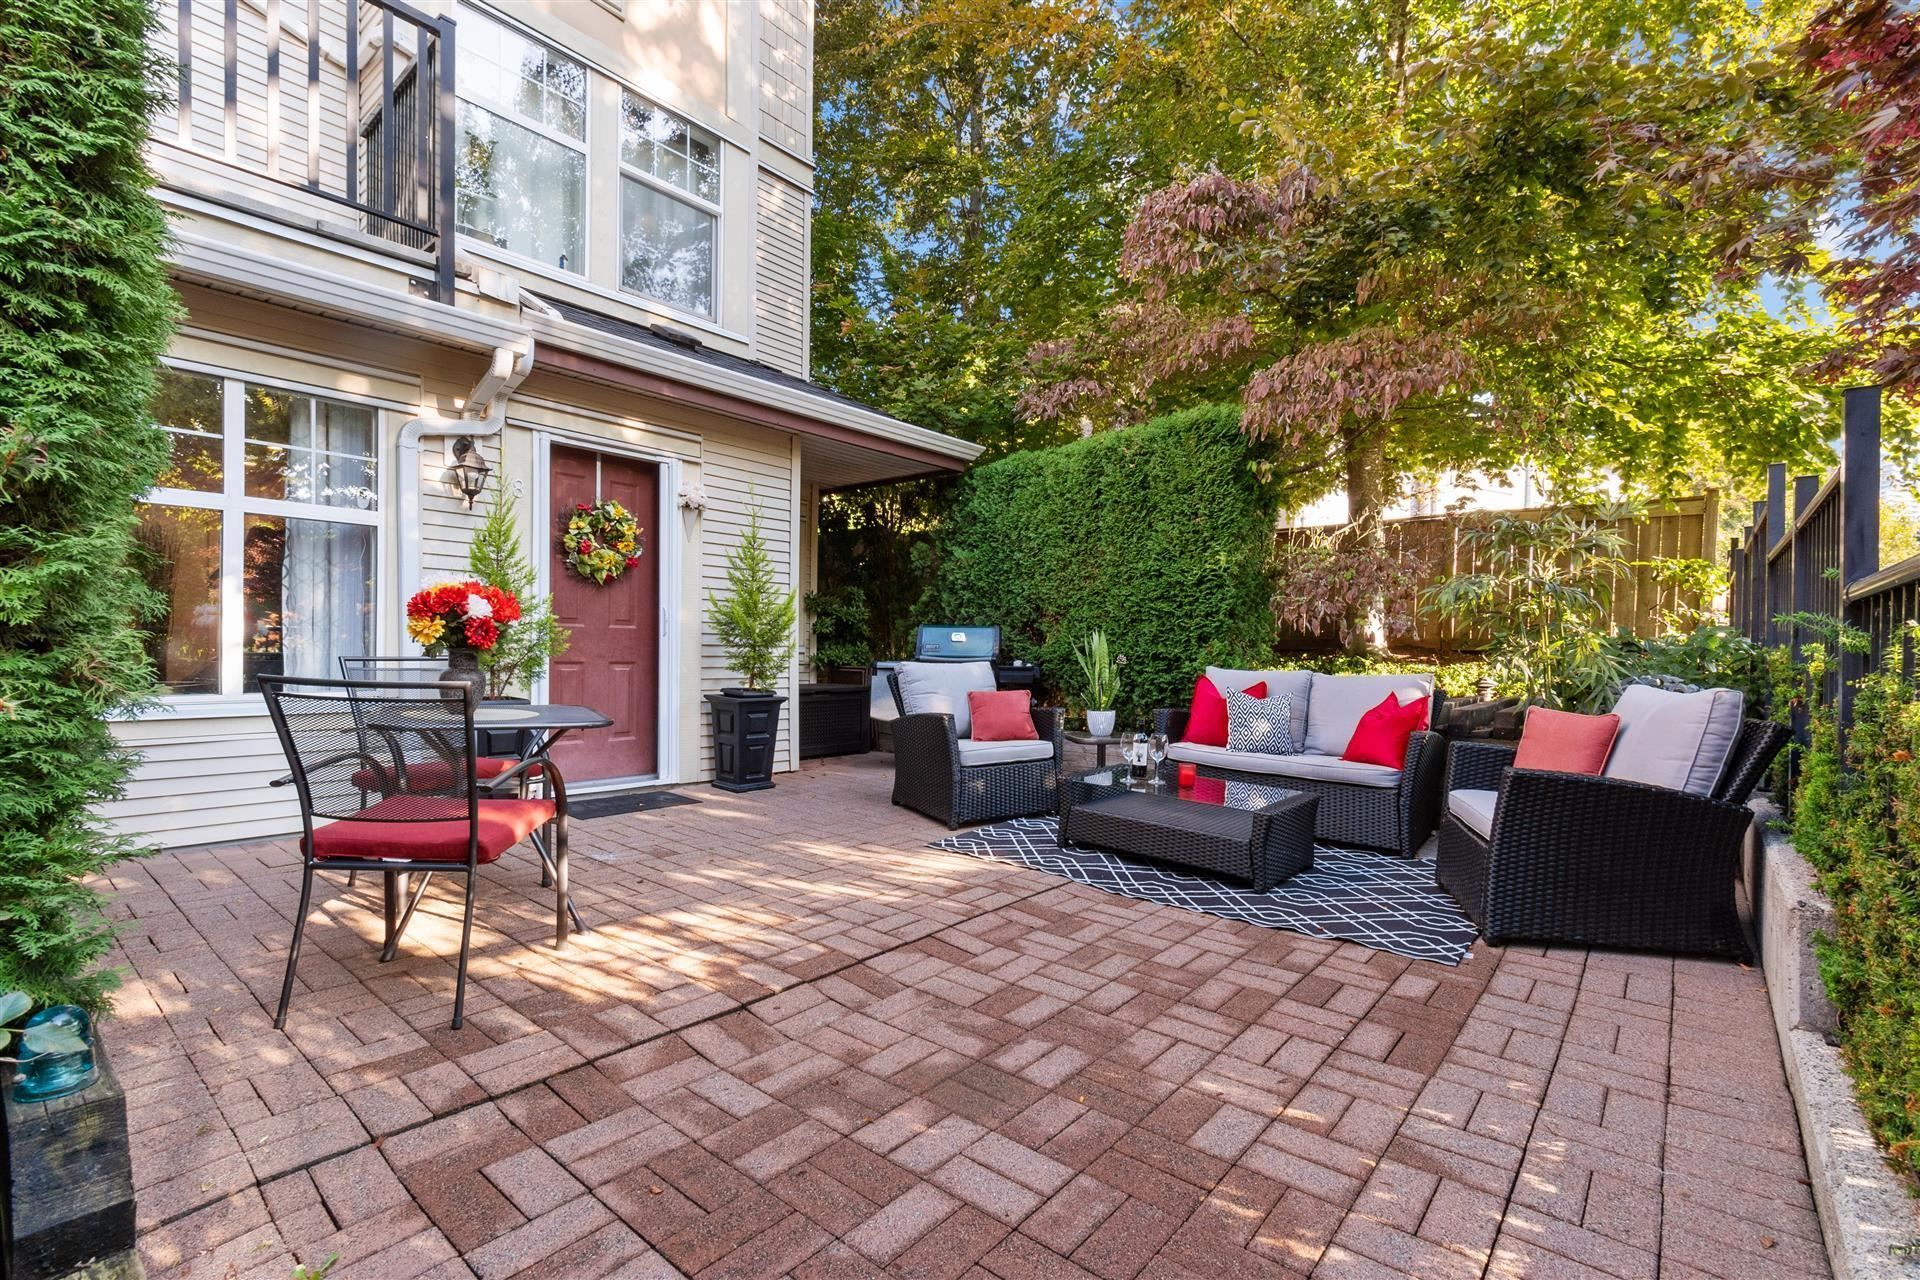 The Thornton Group has just listed ANOTHER home in Highgate, Burnaby South